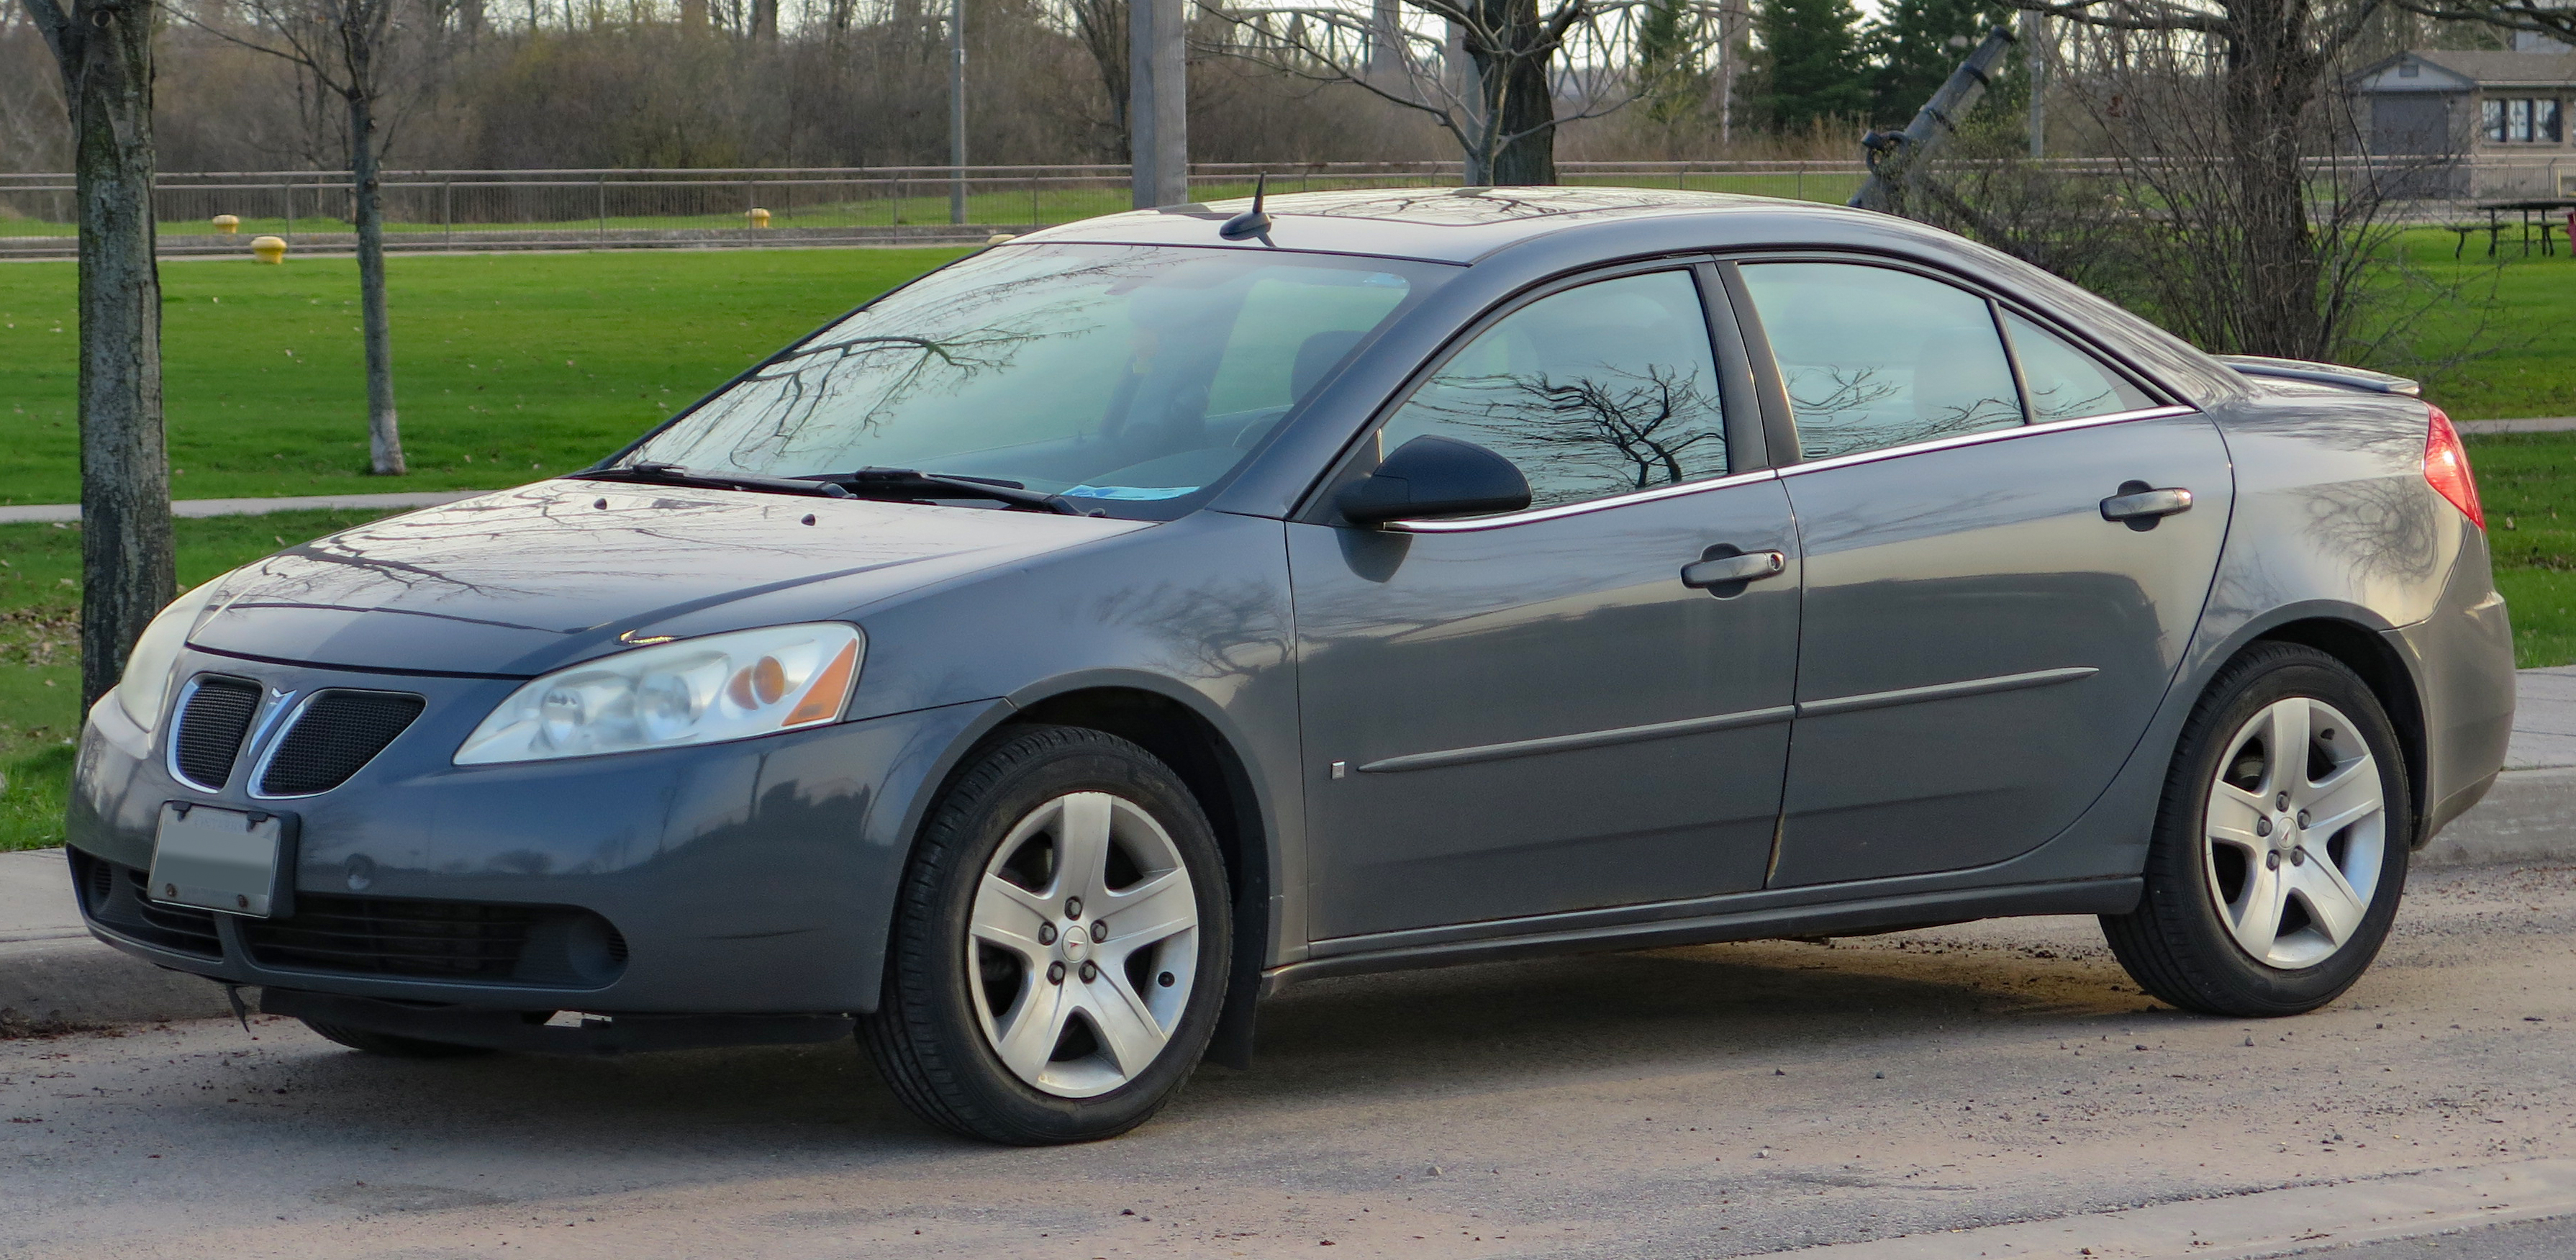 2009 Pontiac G5 Review, Pricing, & Pictures